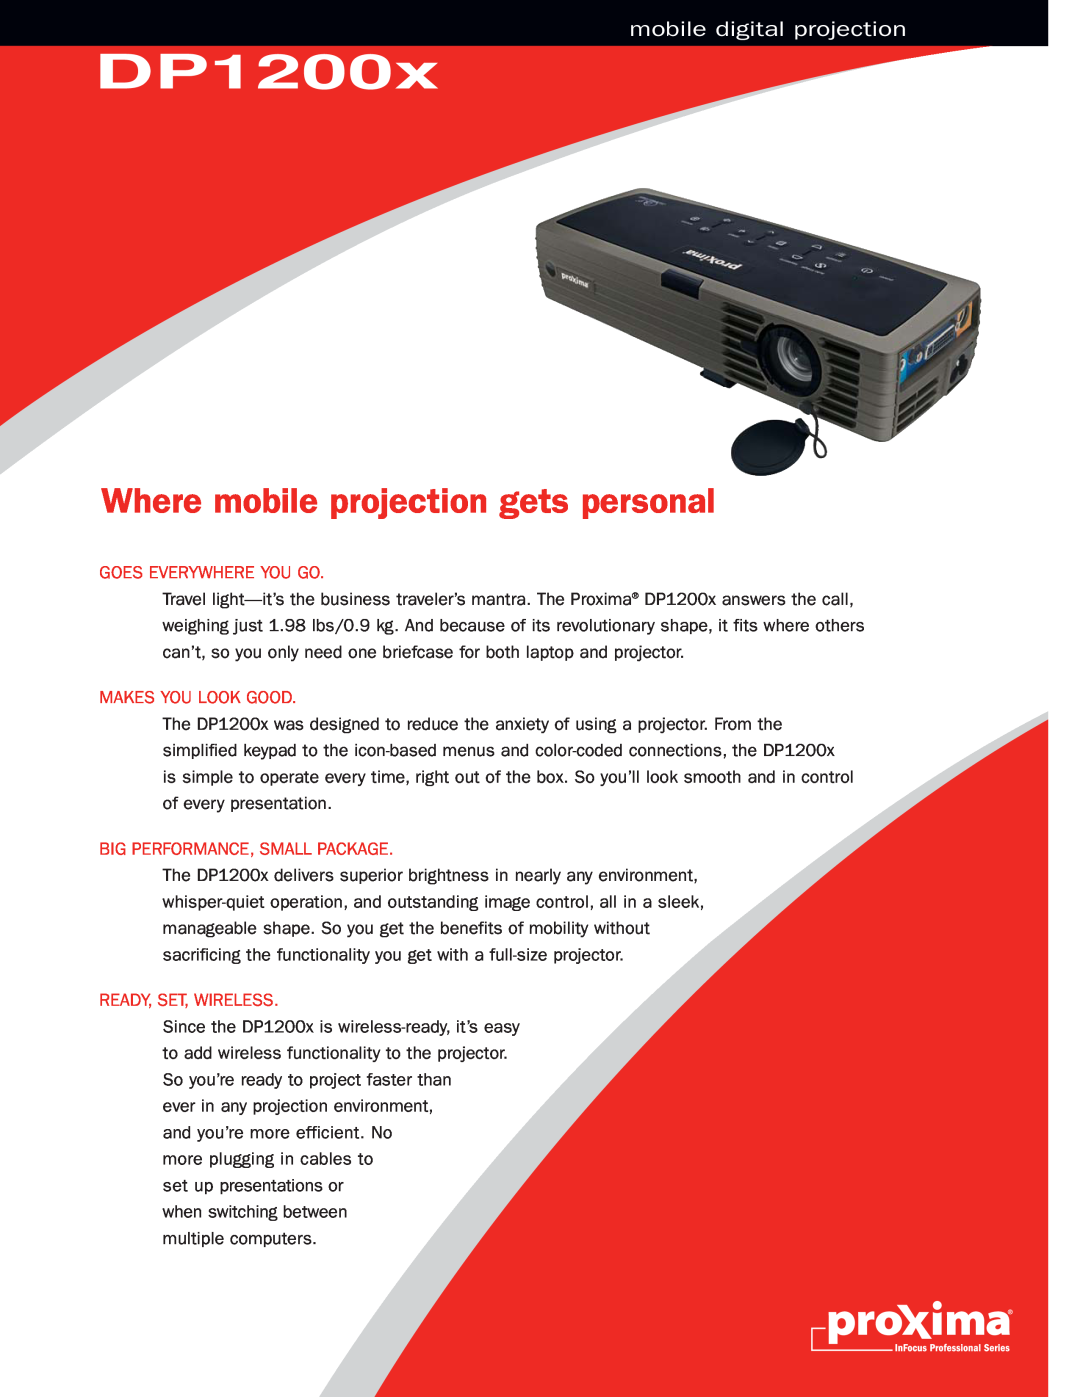 Proxima ASA DP1200x manual mobile digital projection, Goes Everywhere You Go, Makes You Look Good, Ready, Set, Wireless 